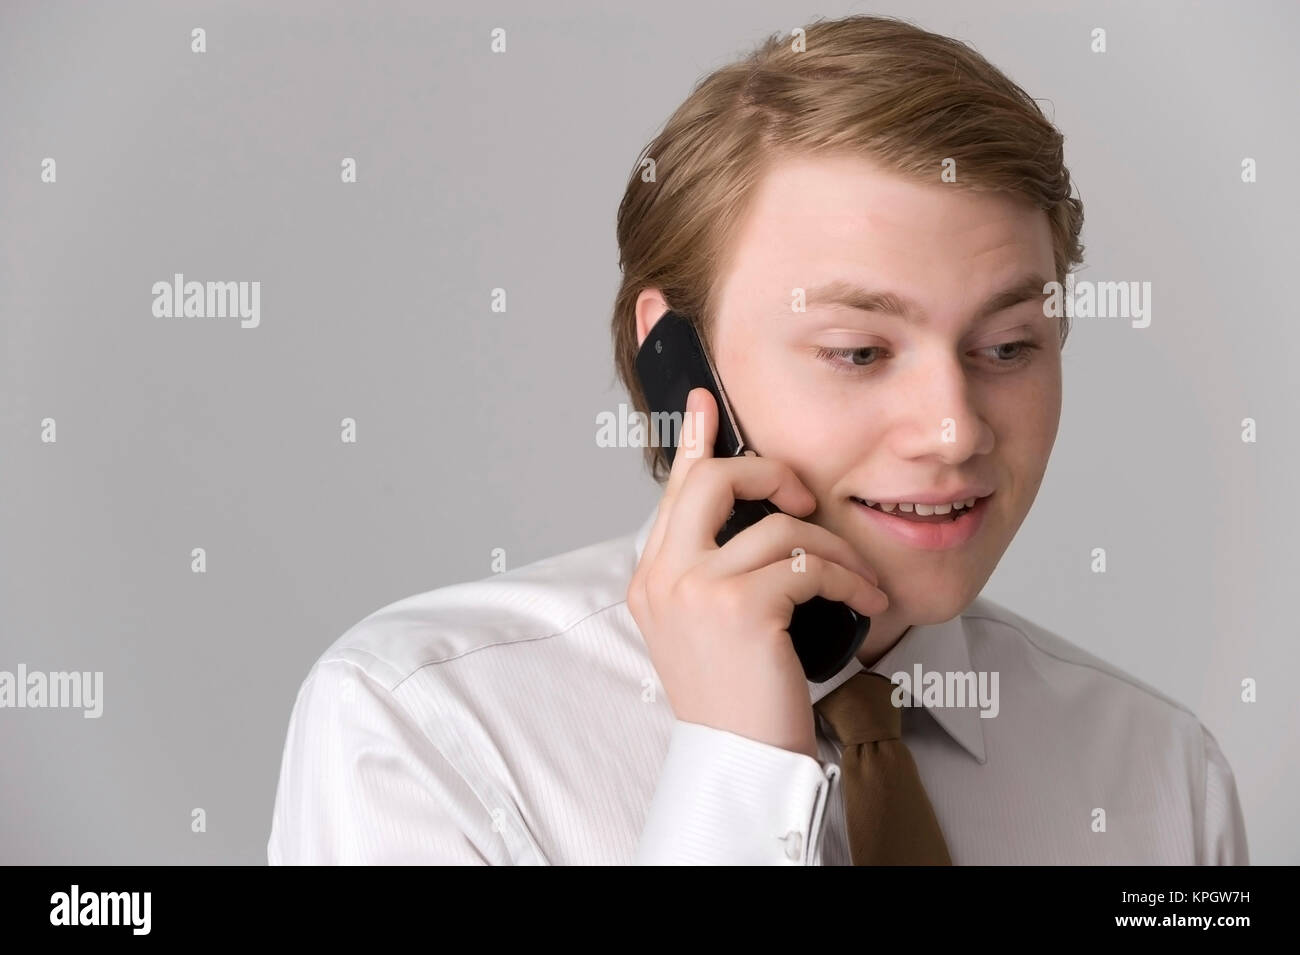 Model released , Junger Gesch?ftsmann mit Handy - young businessman with mobile phone Stock Photo